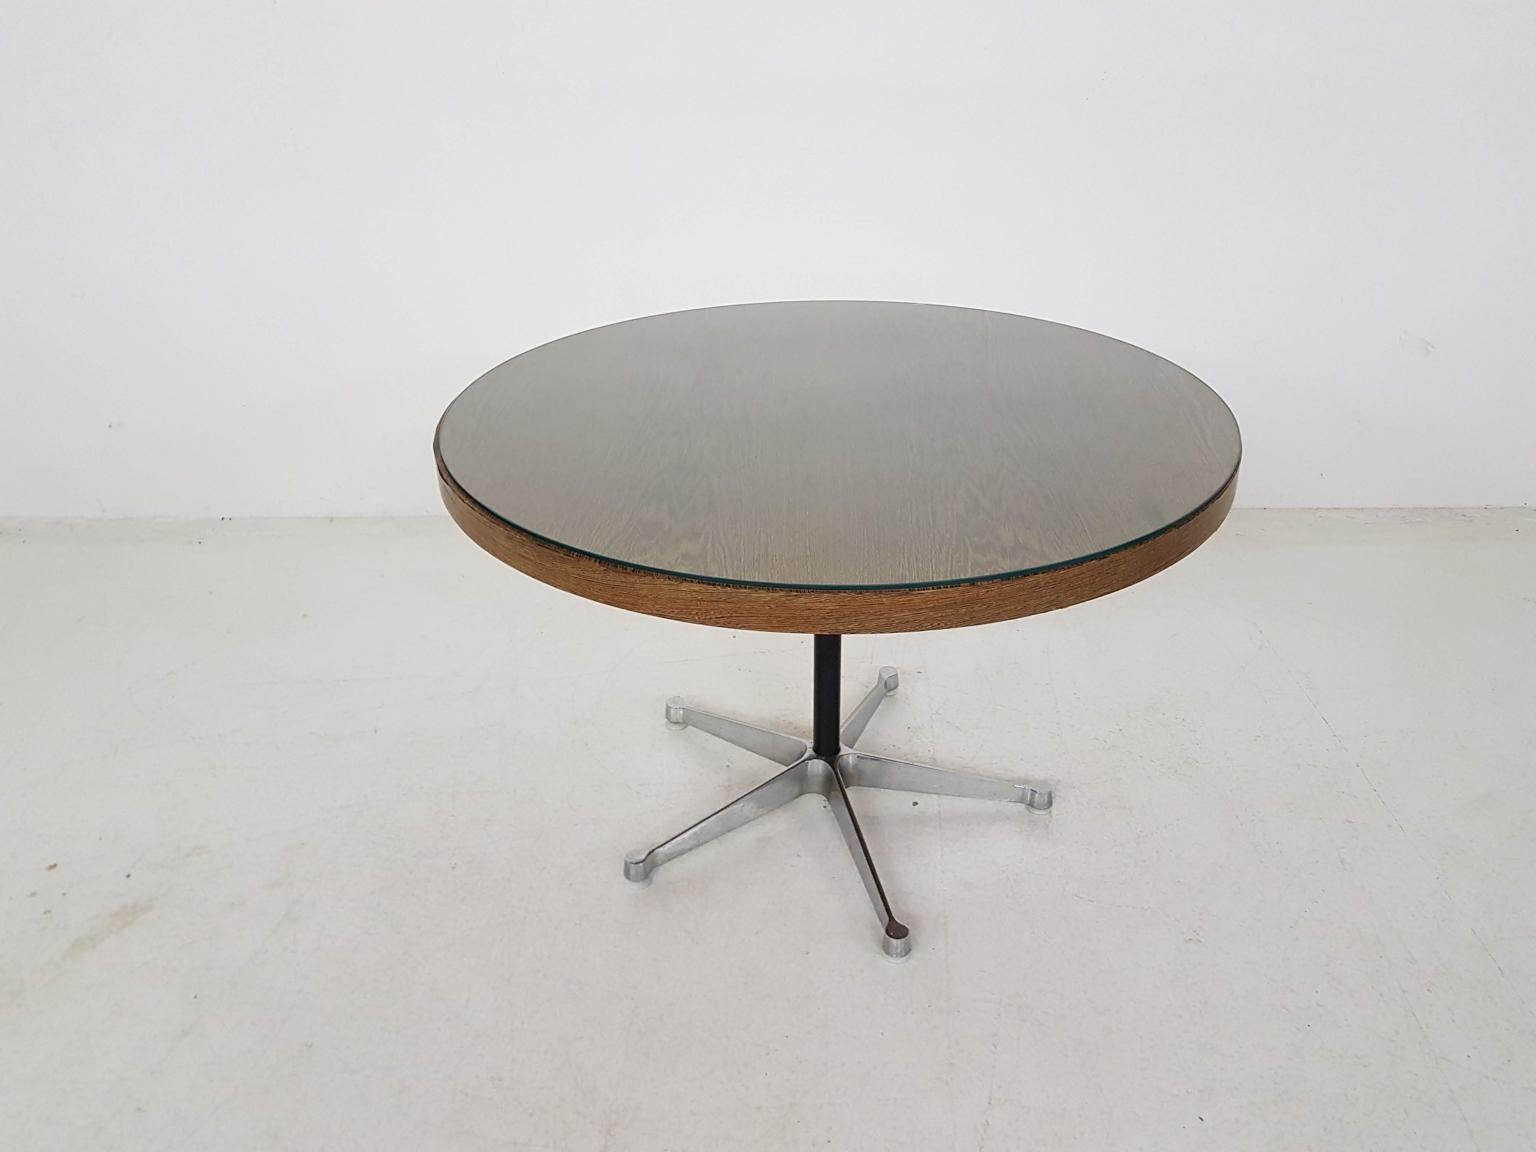 Round wenge veneer top and a metal foot.
Glass top was used to protect the table, it has a small chip, but the table can also be used without the glass top.